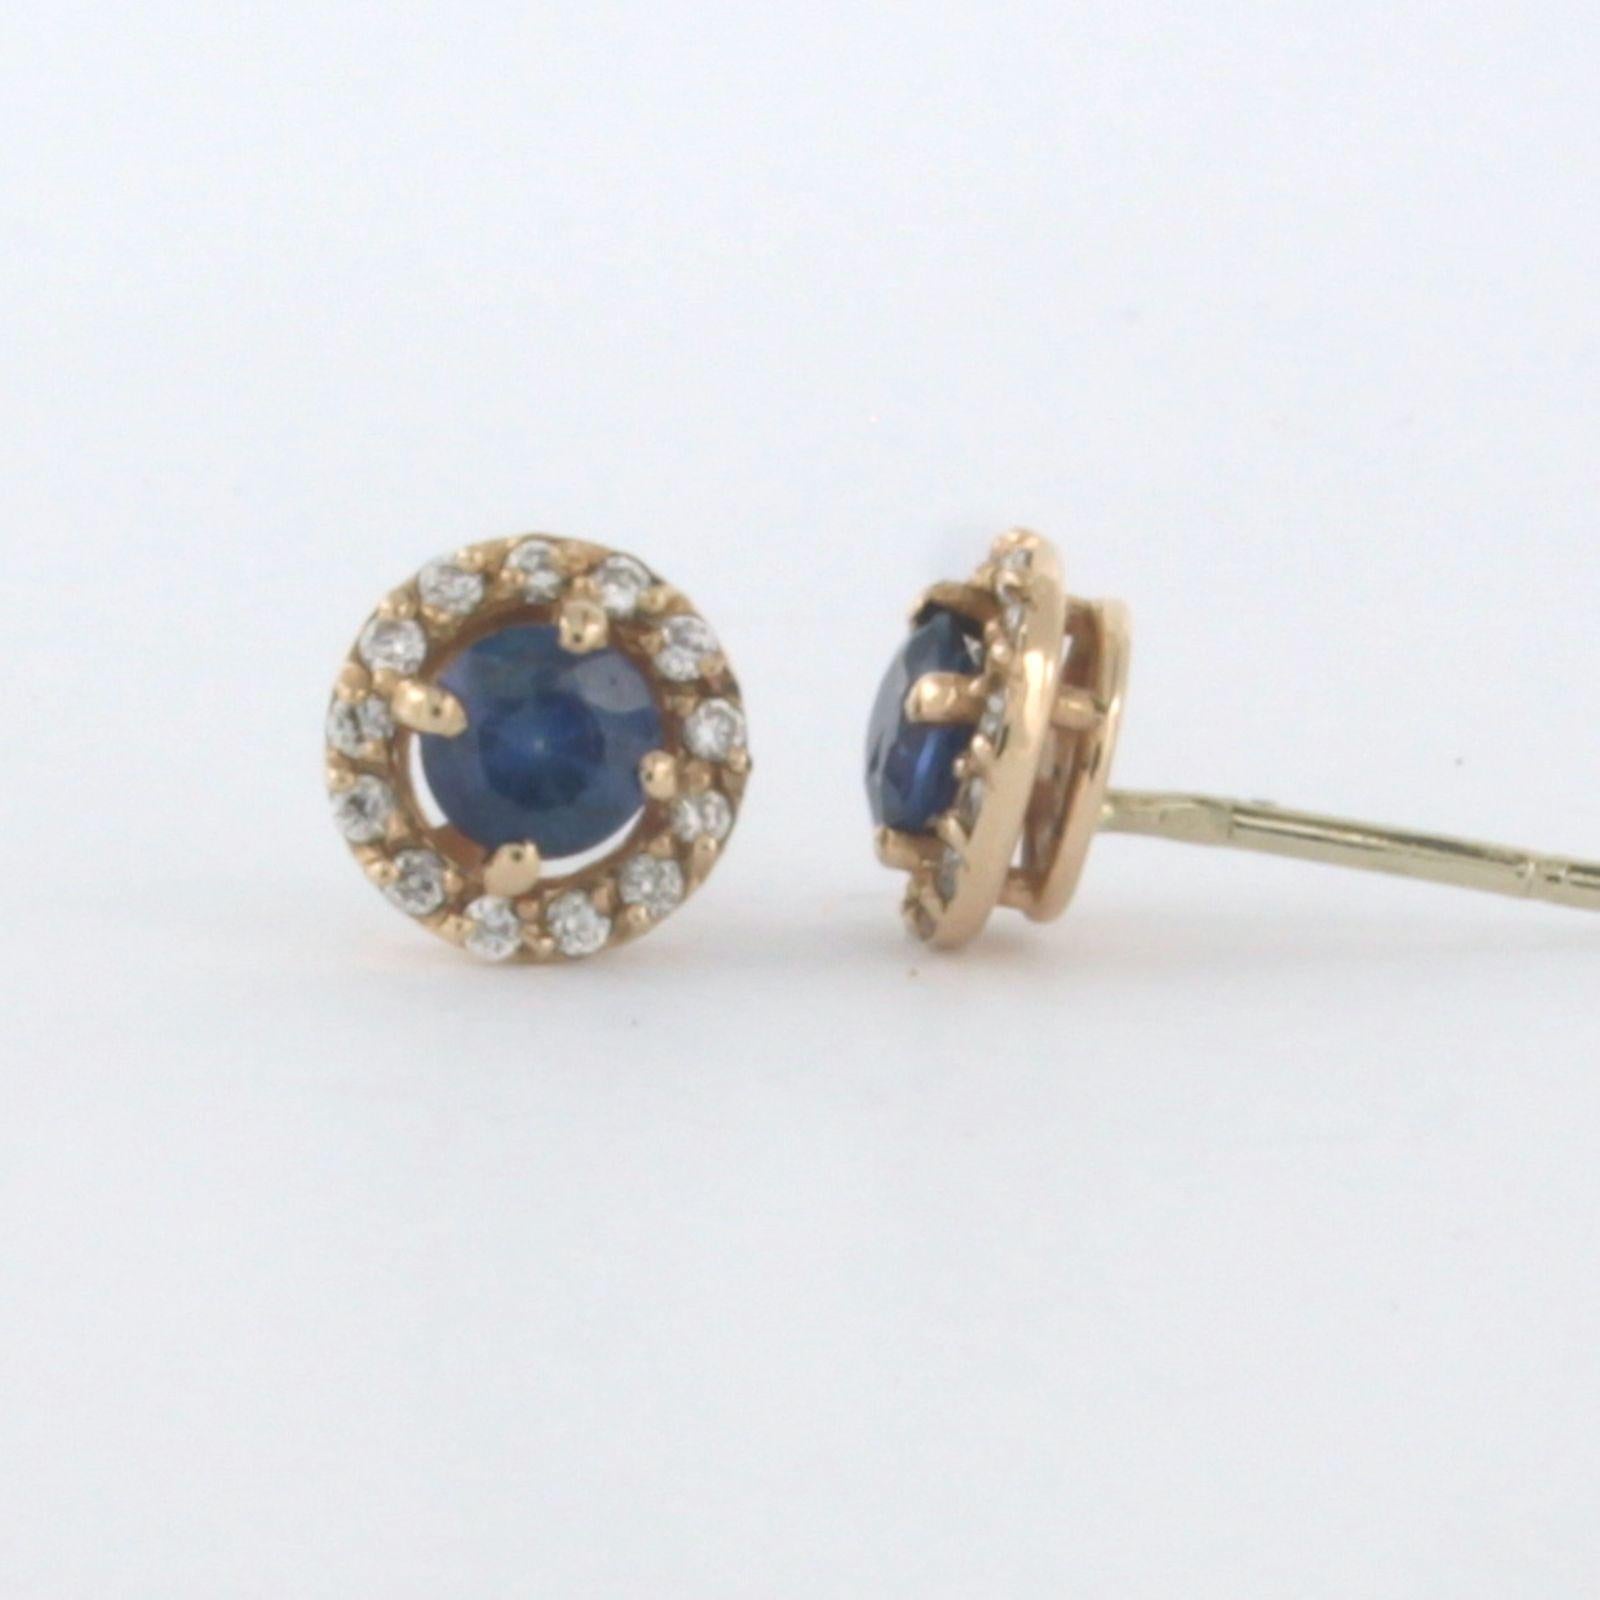 Women's Earrings set with Sapphire and diamonds 14k pink gold